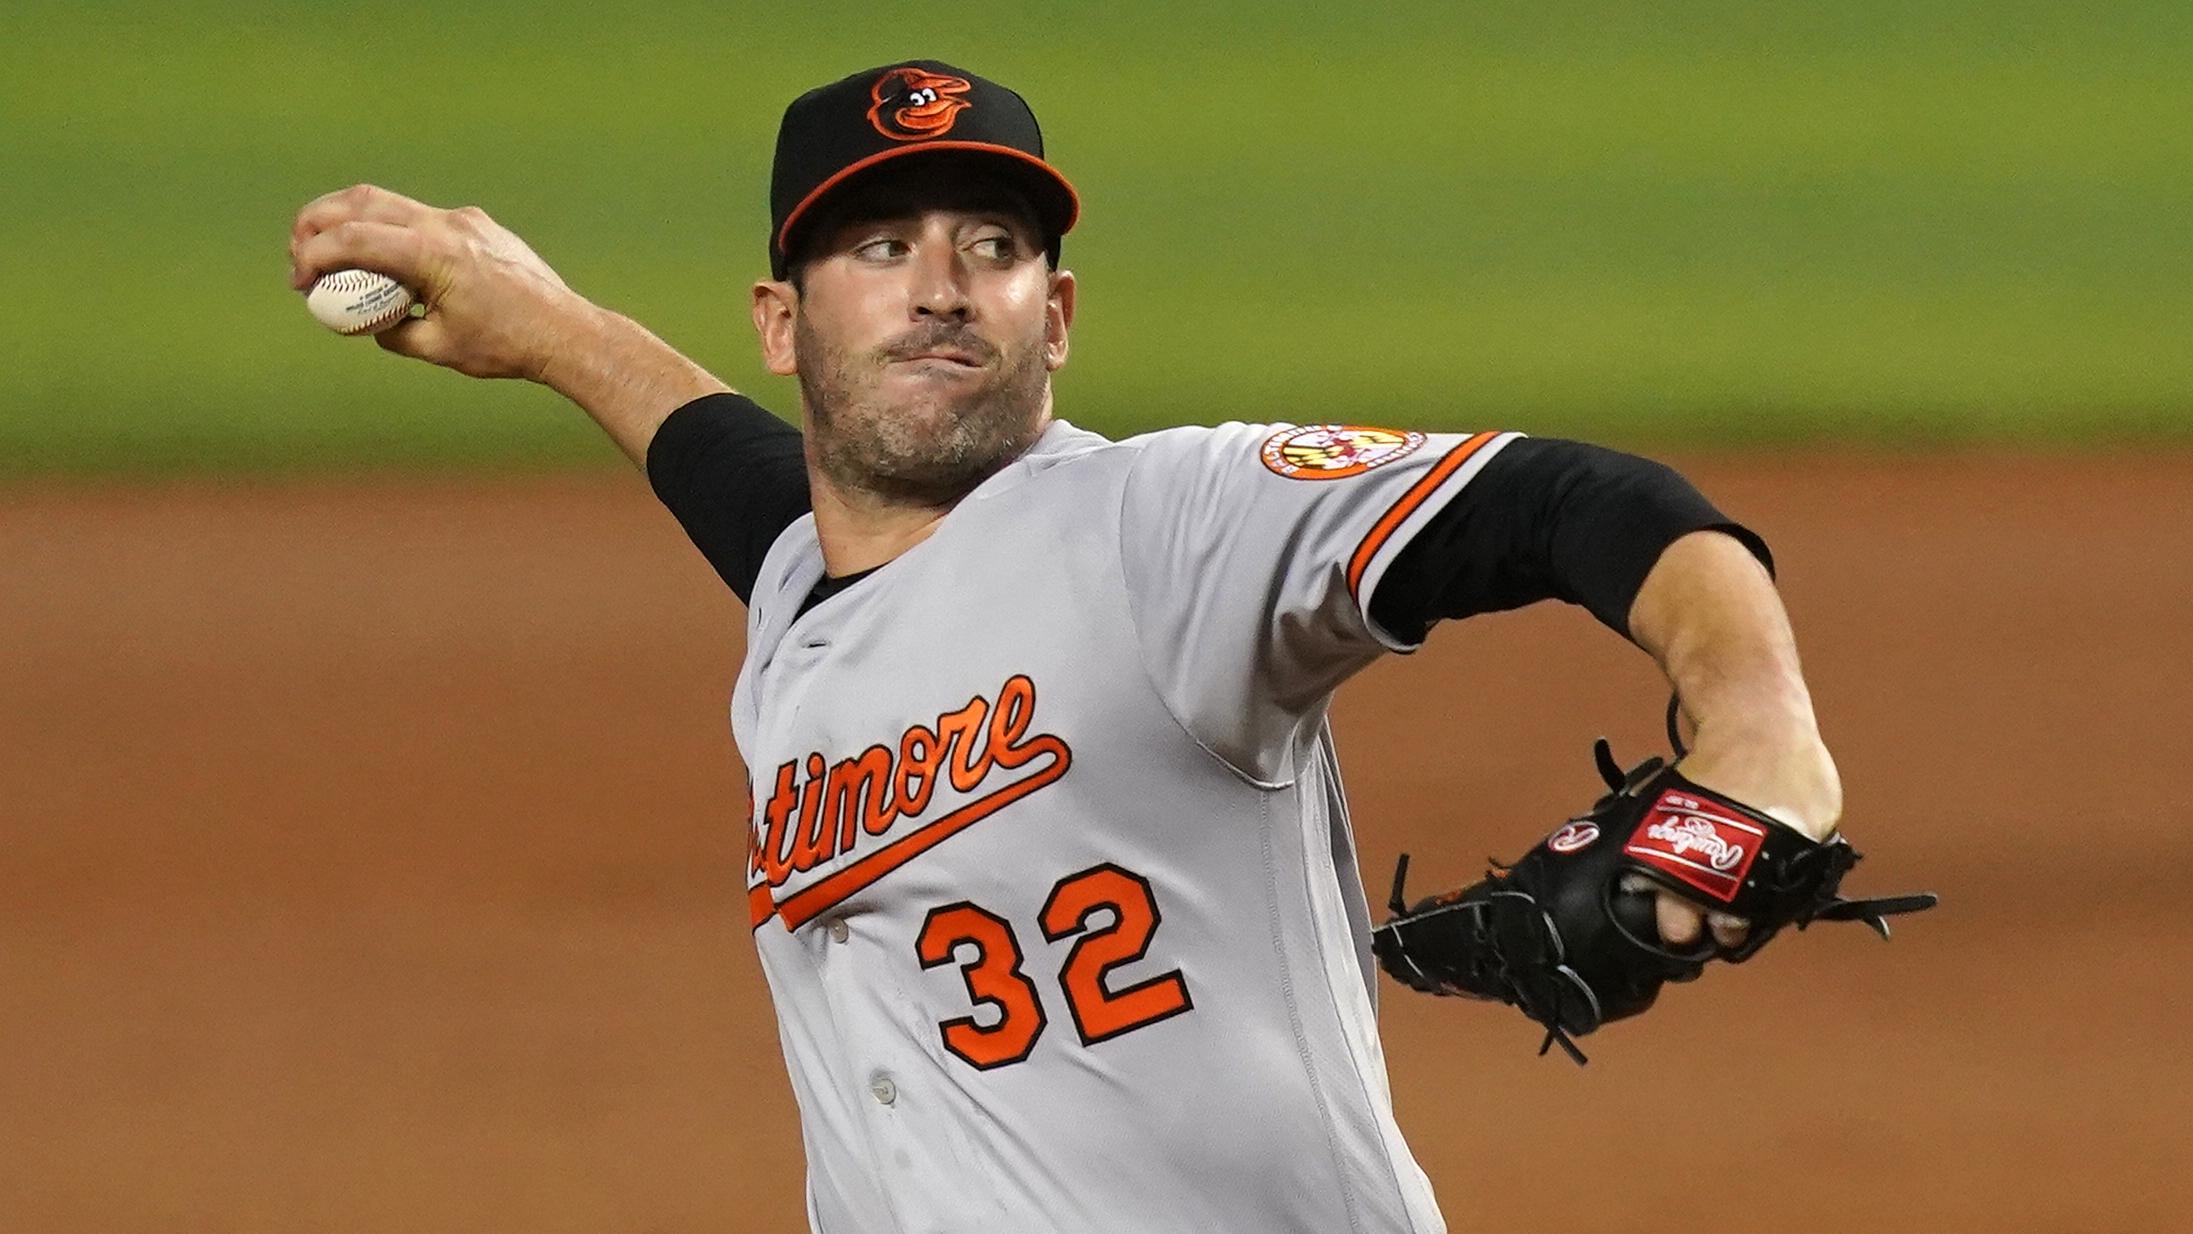 Apr 20, 2021; Miami, Florida, USA; Baltimore Orioles starting pitcher Matt Harvey (32) delivers a pitch in the 2nd inning against the Miami Marlins at loanDepot park. / Jasen Vinlove-USA TODAY Sports